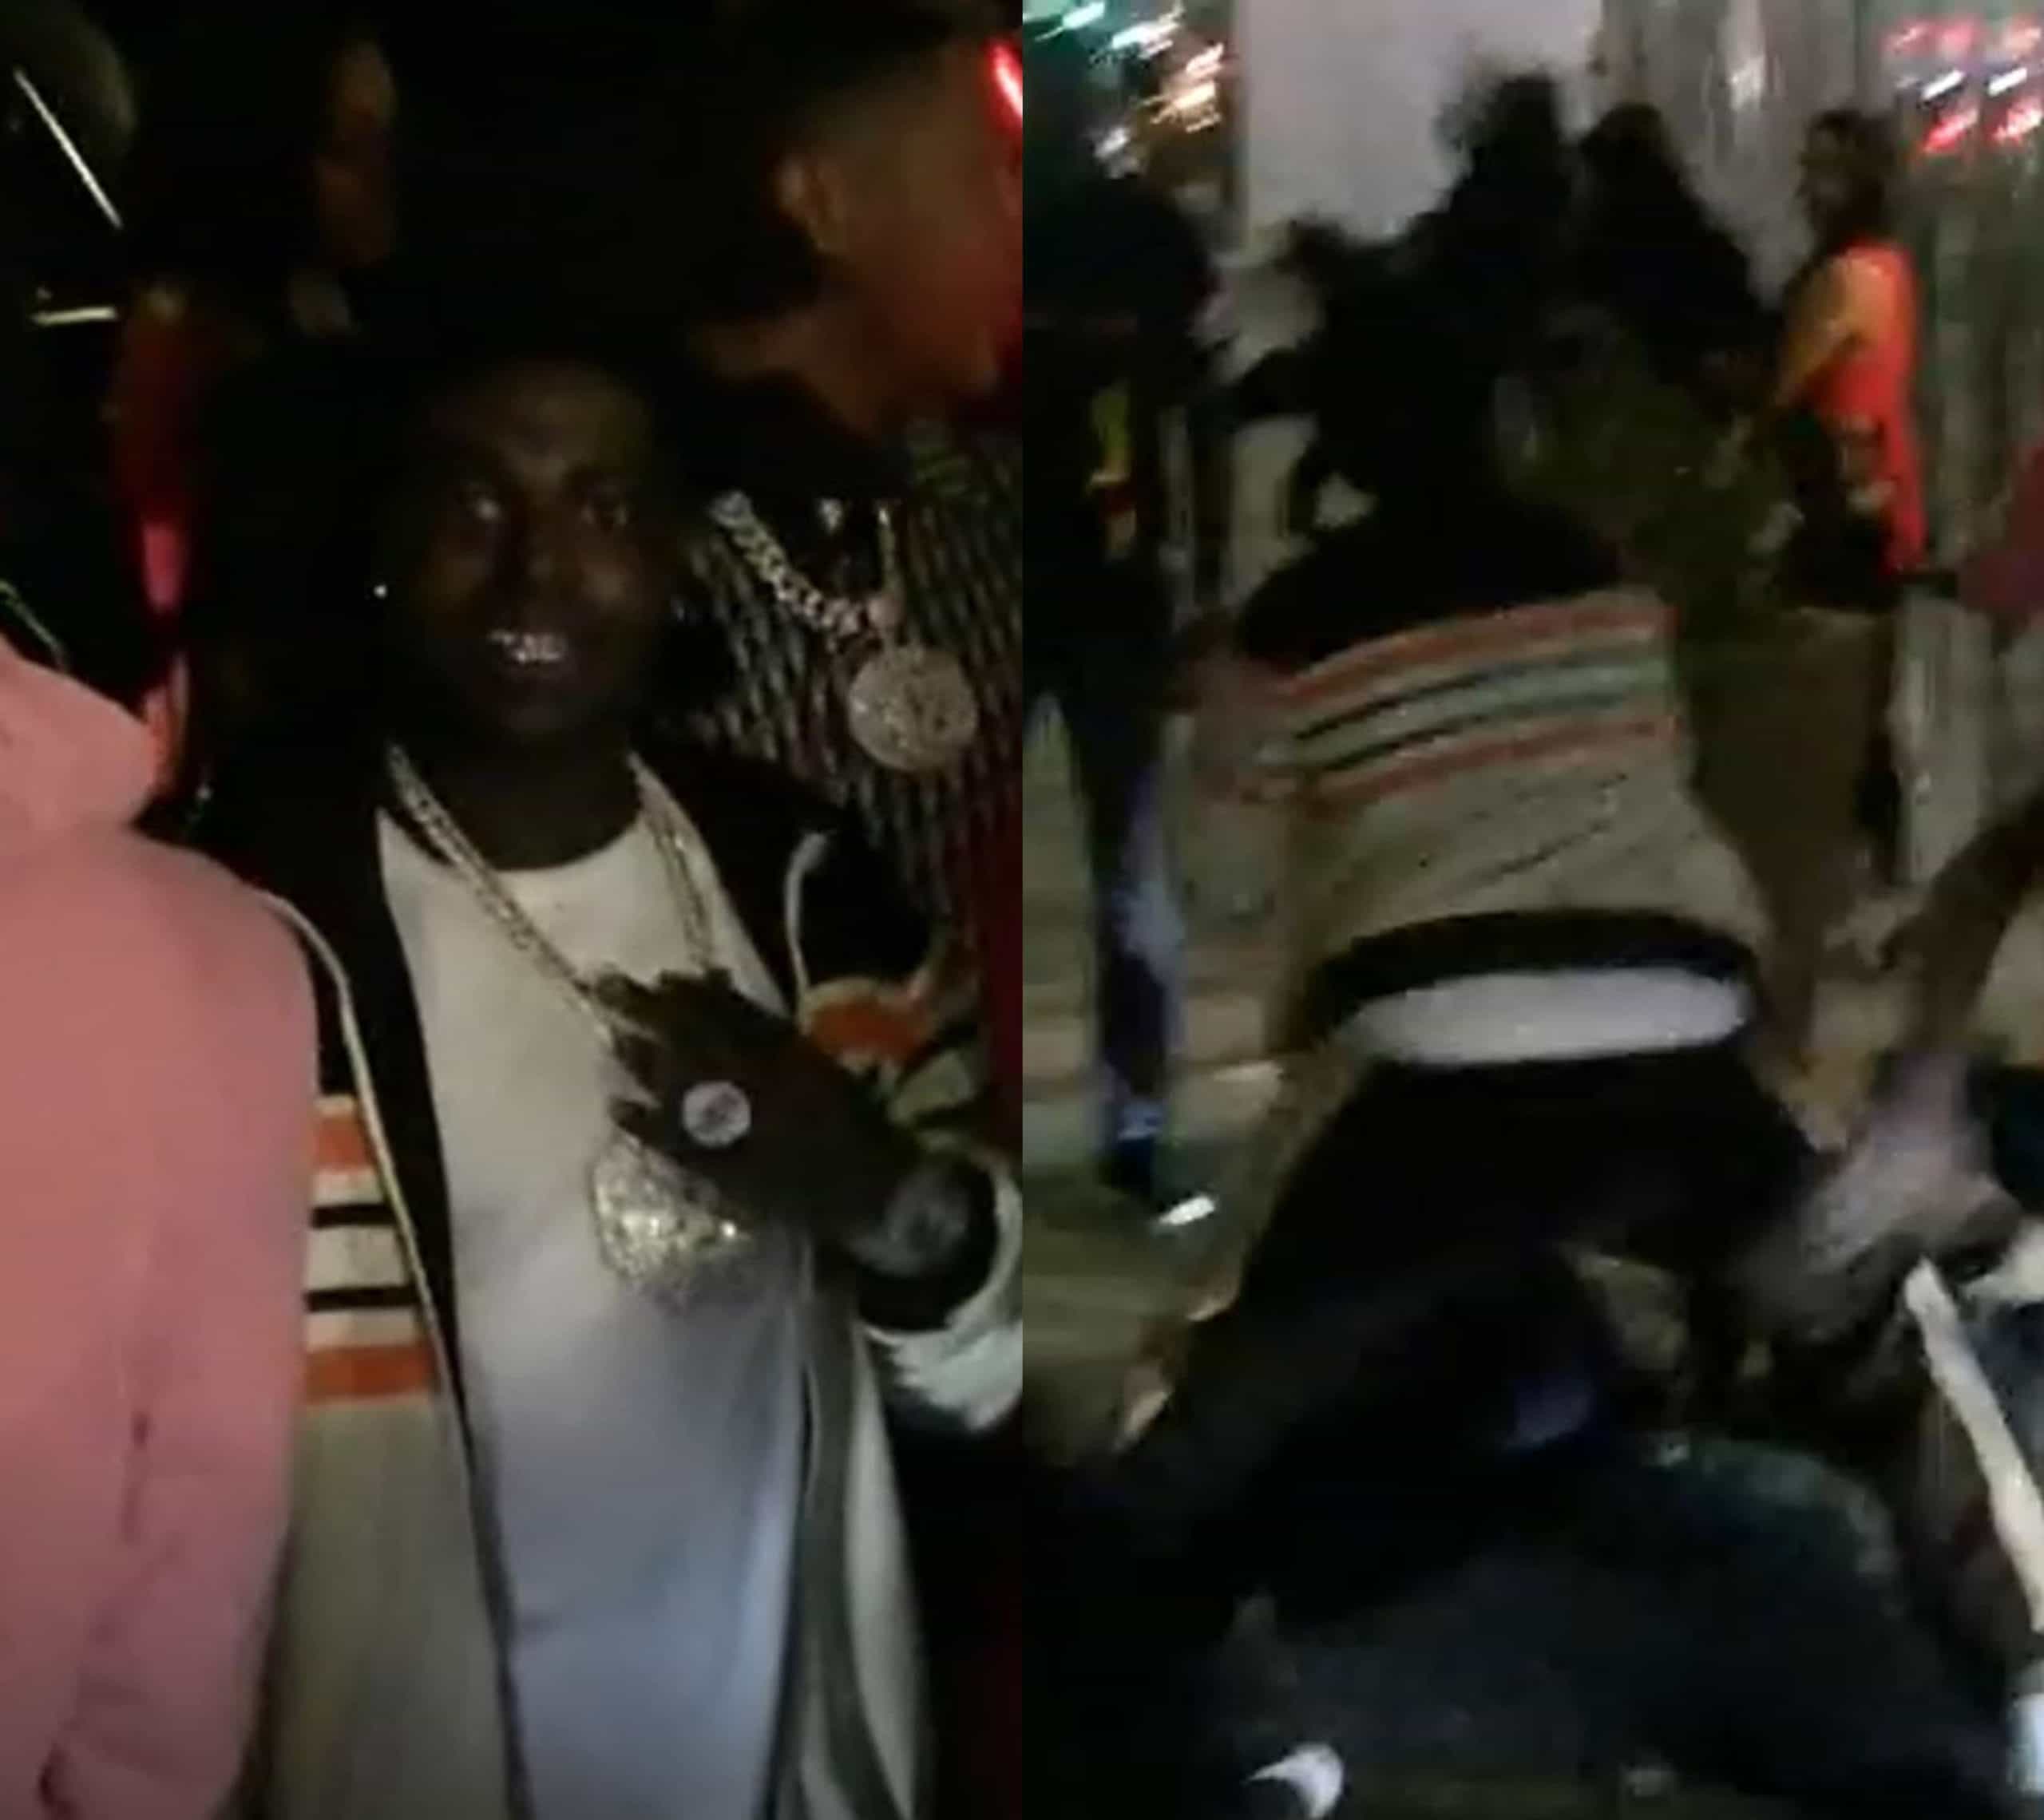 Kodak Black Gets Into A Fight Outside Justin Bieber's Concert After-Party Where 4 People Were Shot